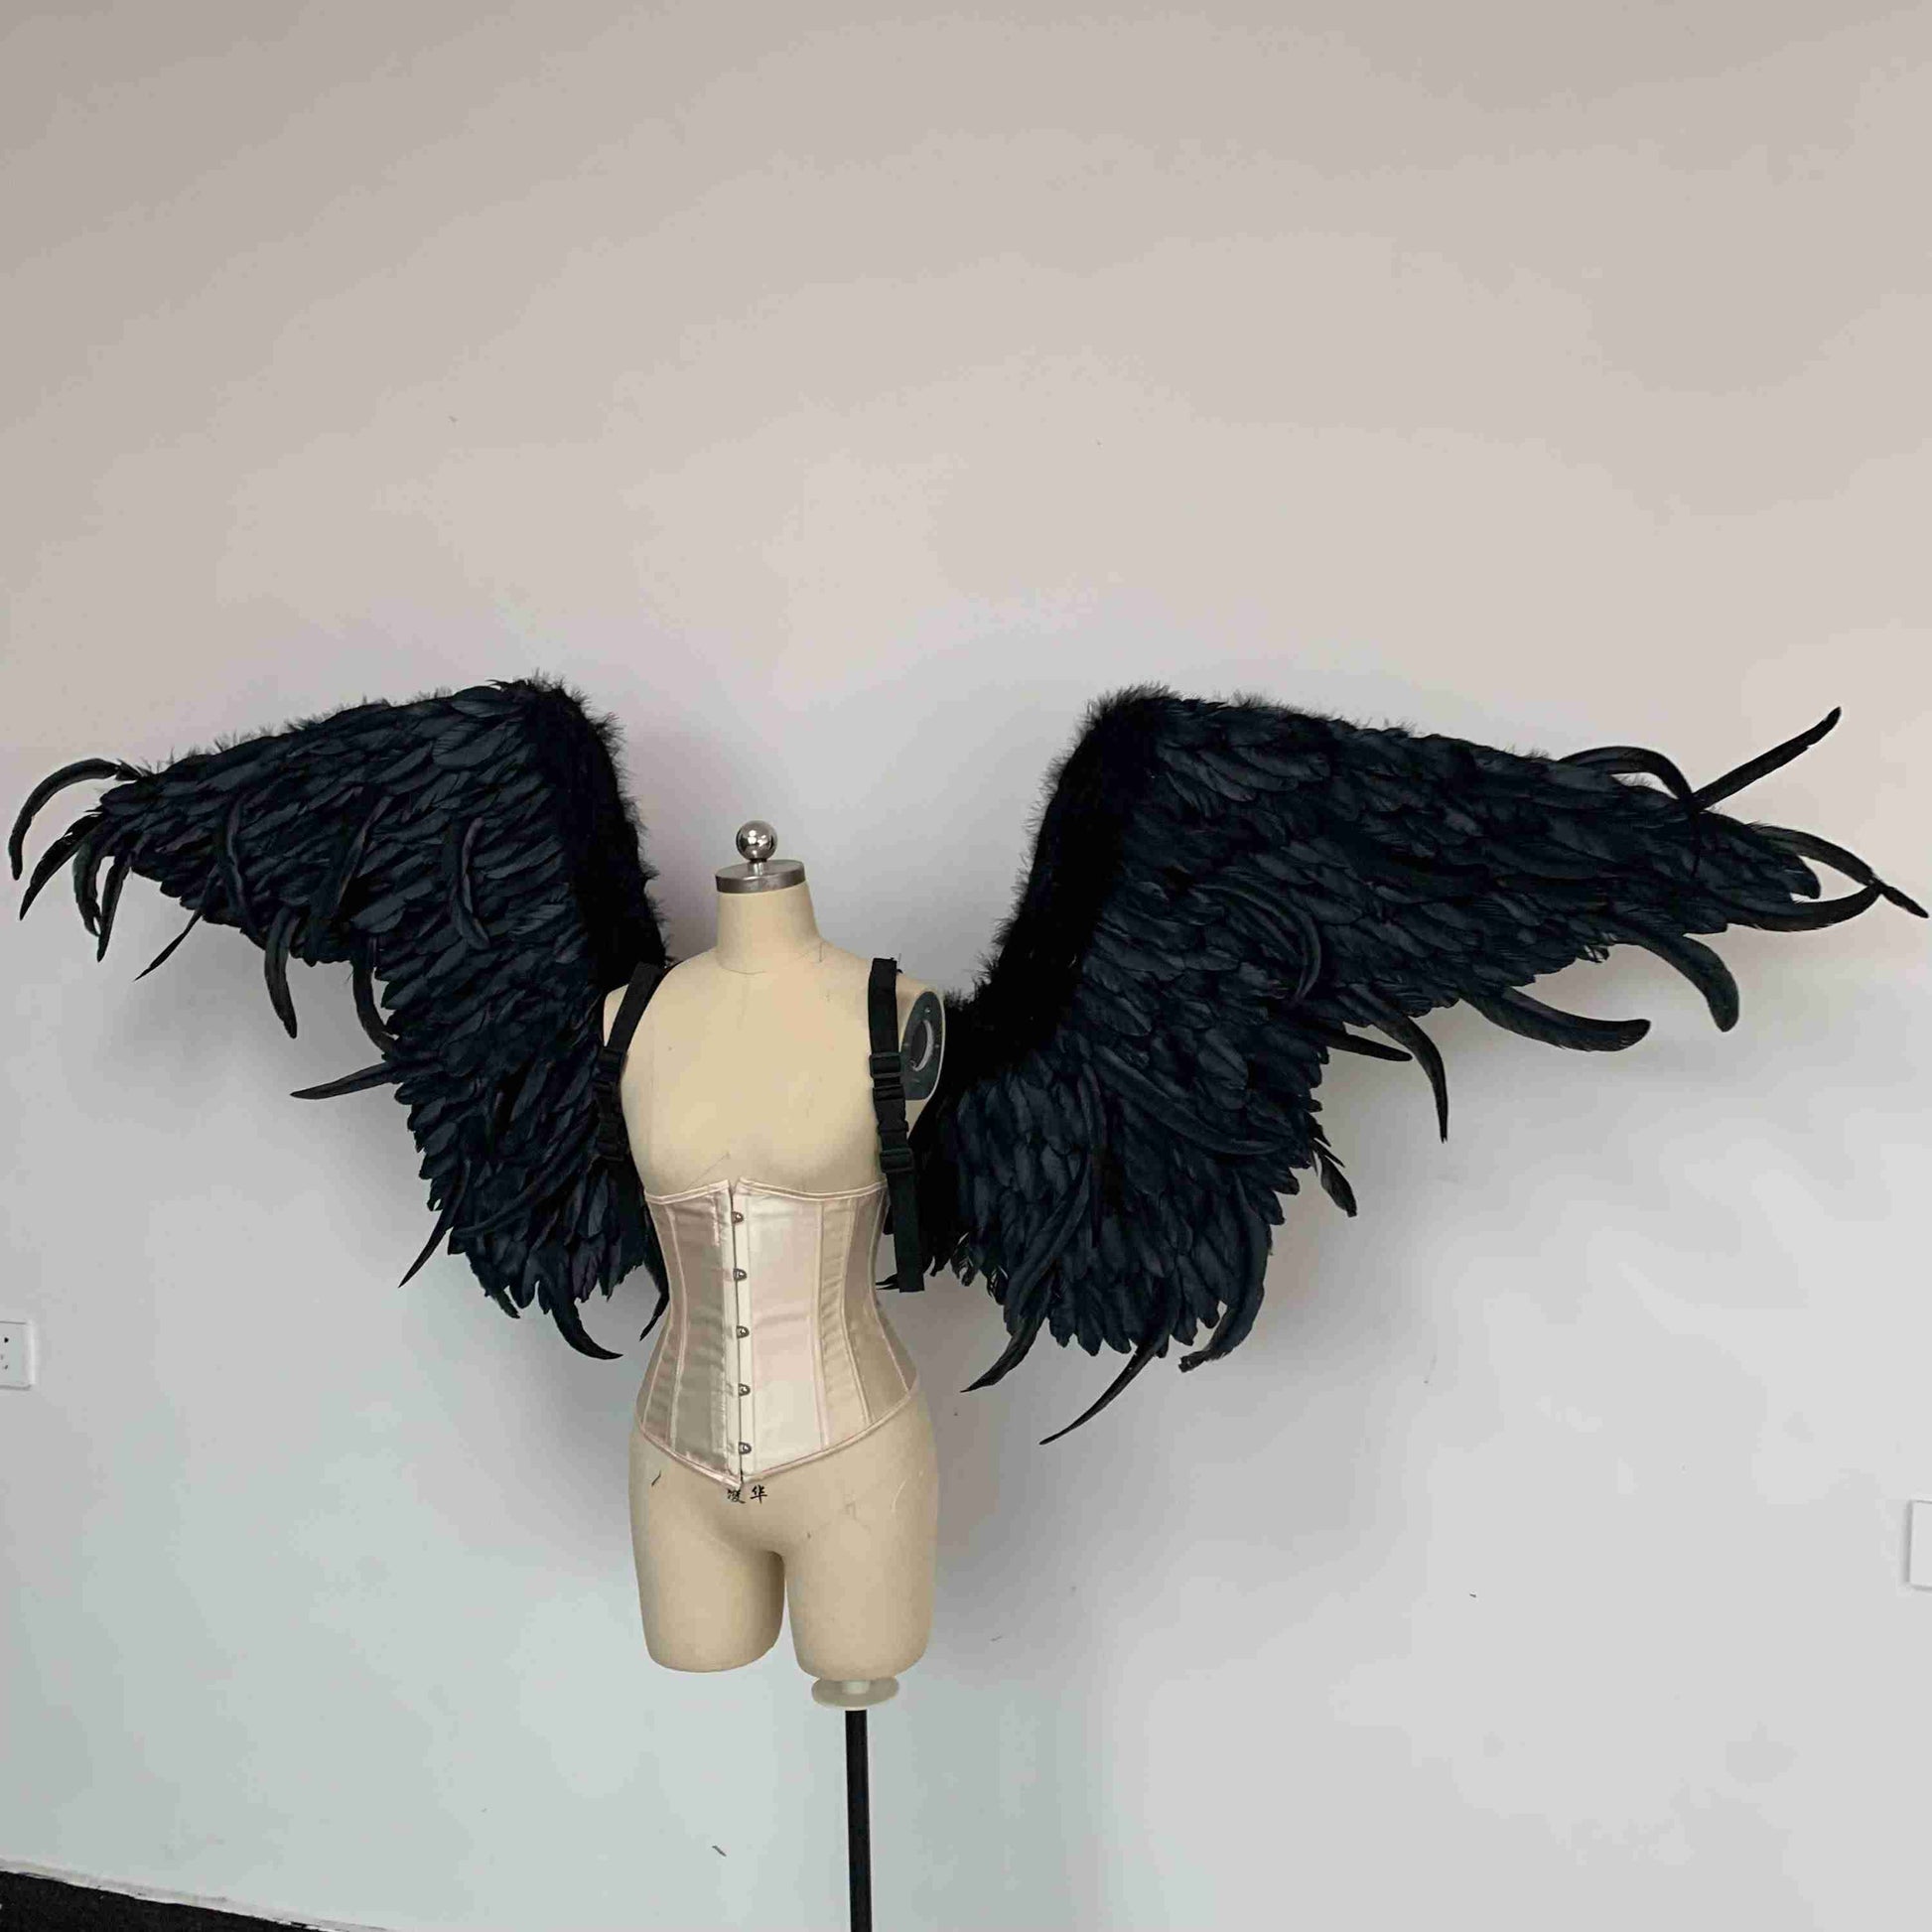 Our black color demon wings from the left side. Made from goose feathers. Wings for angel costume or devil costume. Suitable for photoshoots.